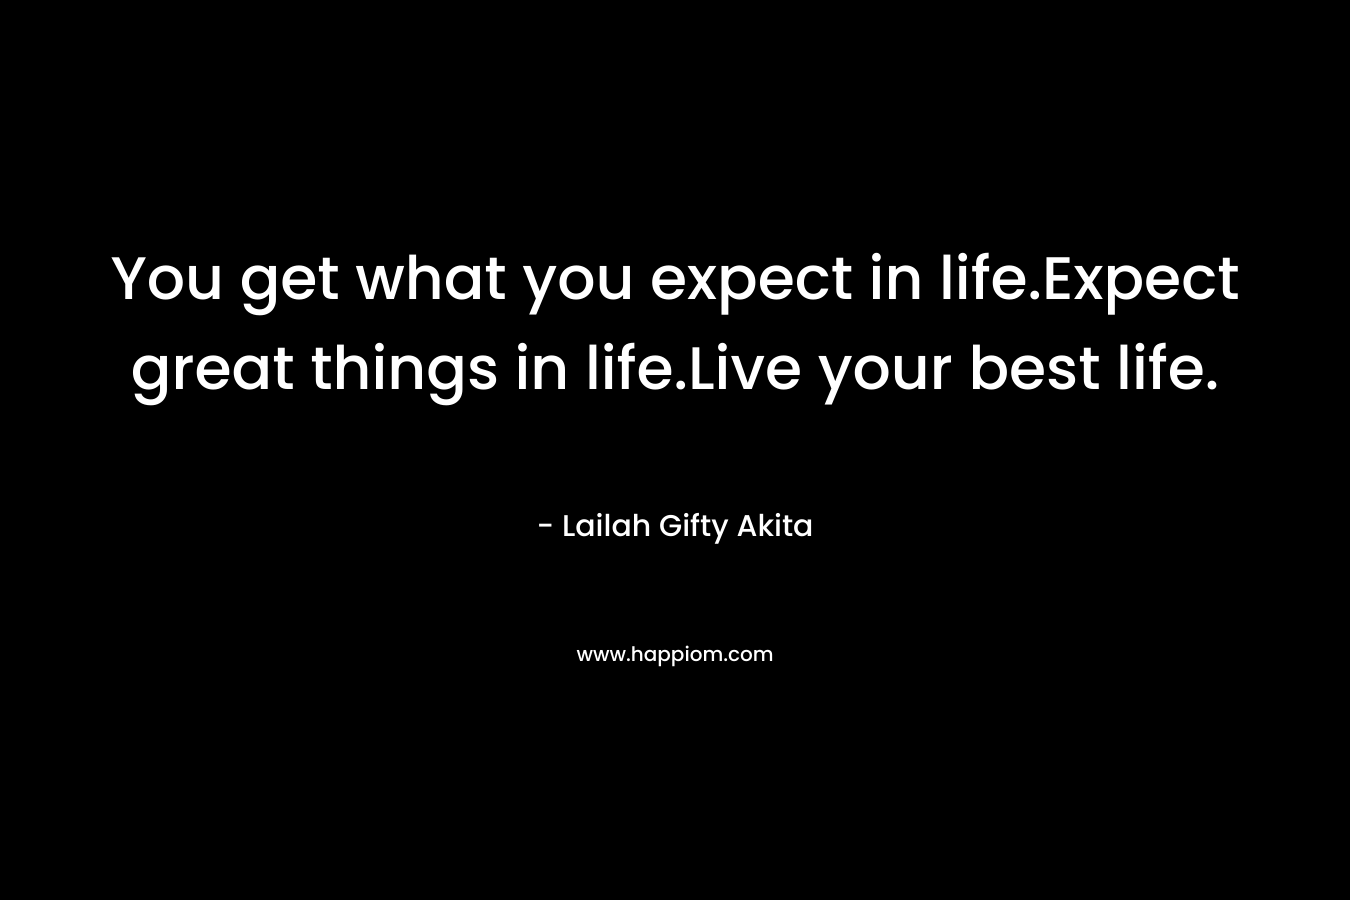 You get what you expect in life.Expect great things in life.Live your best life.